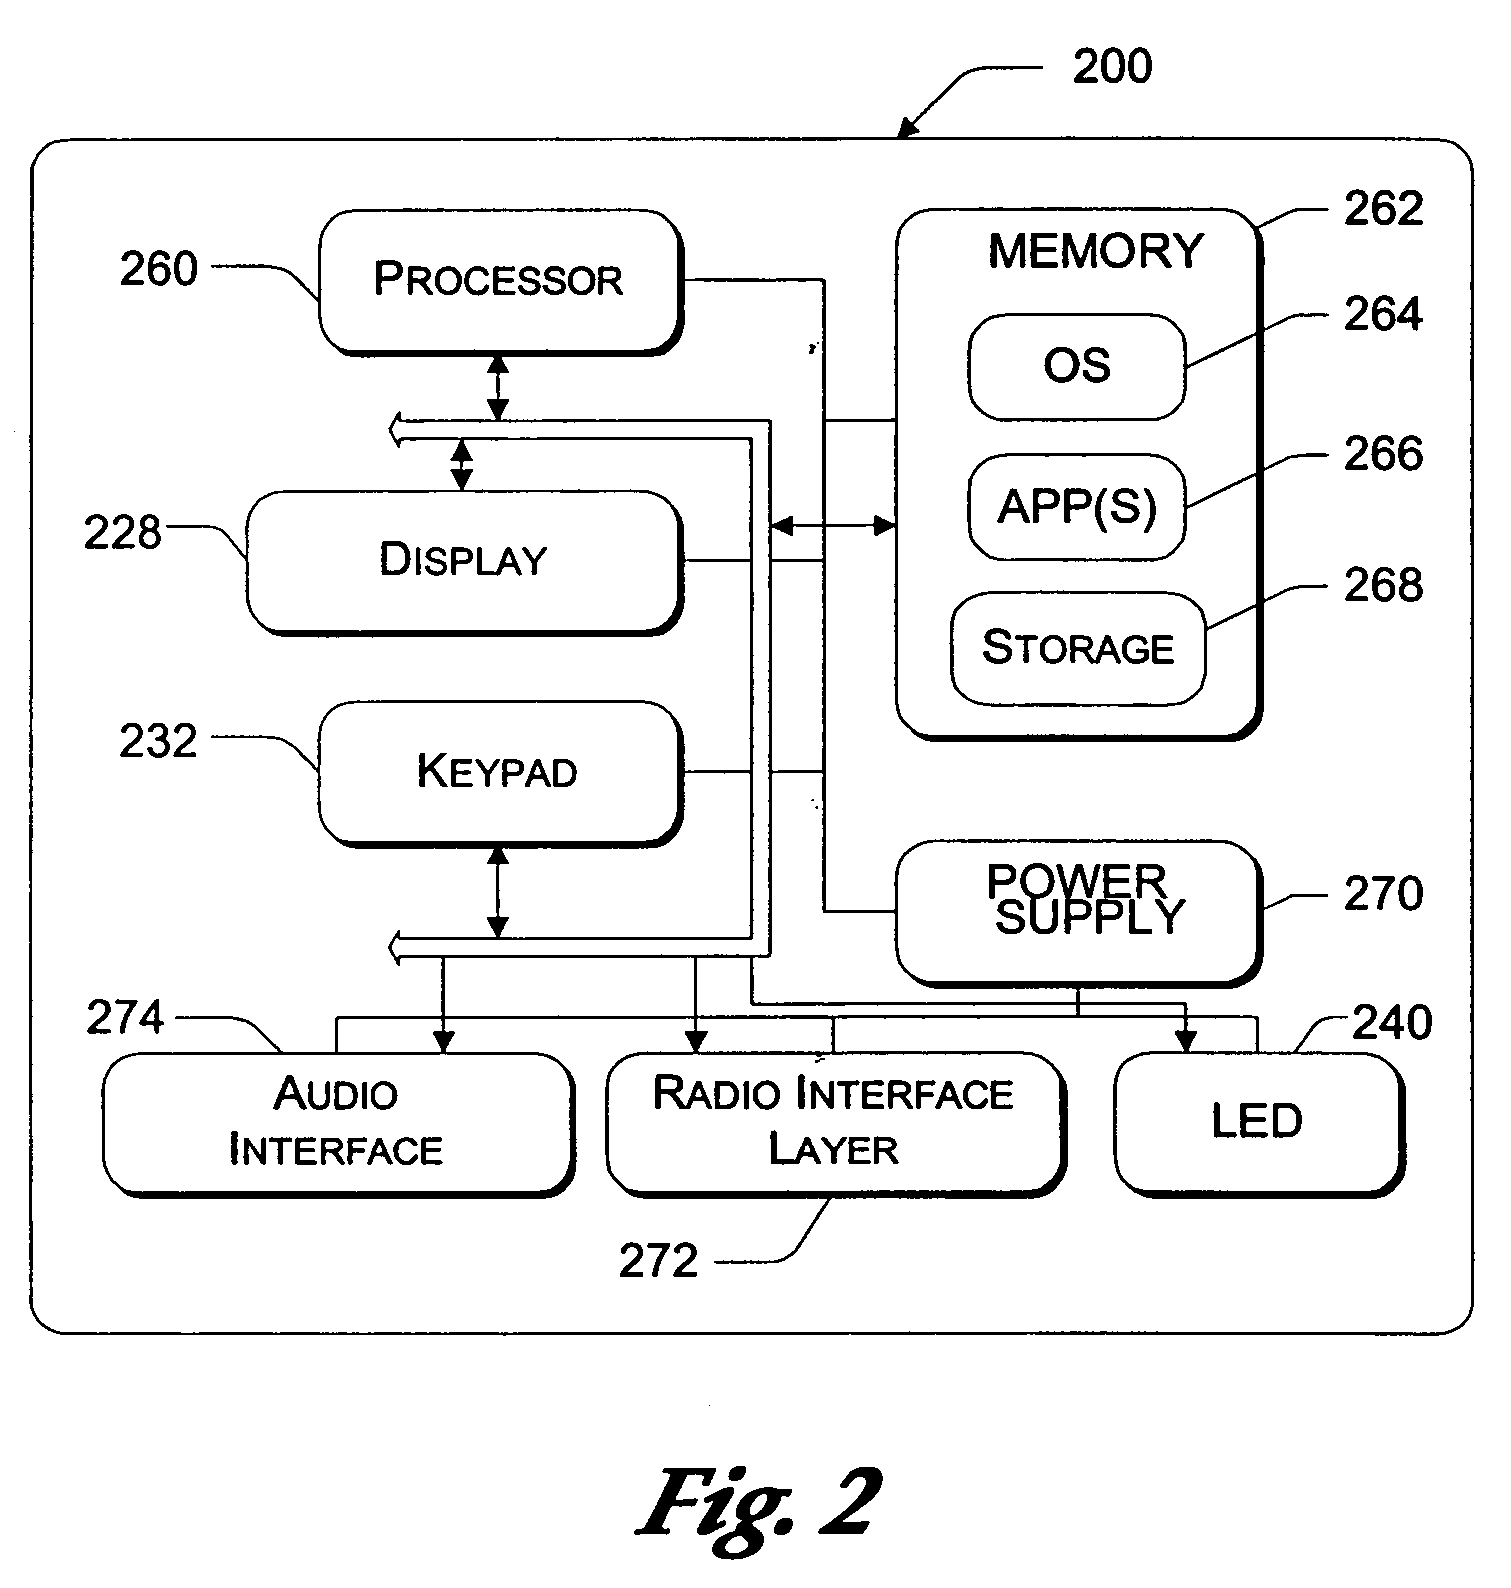 System and method for downloading information to a mobile device